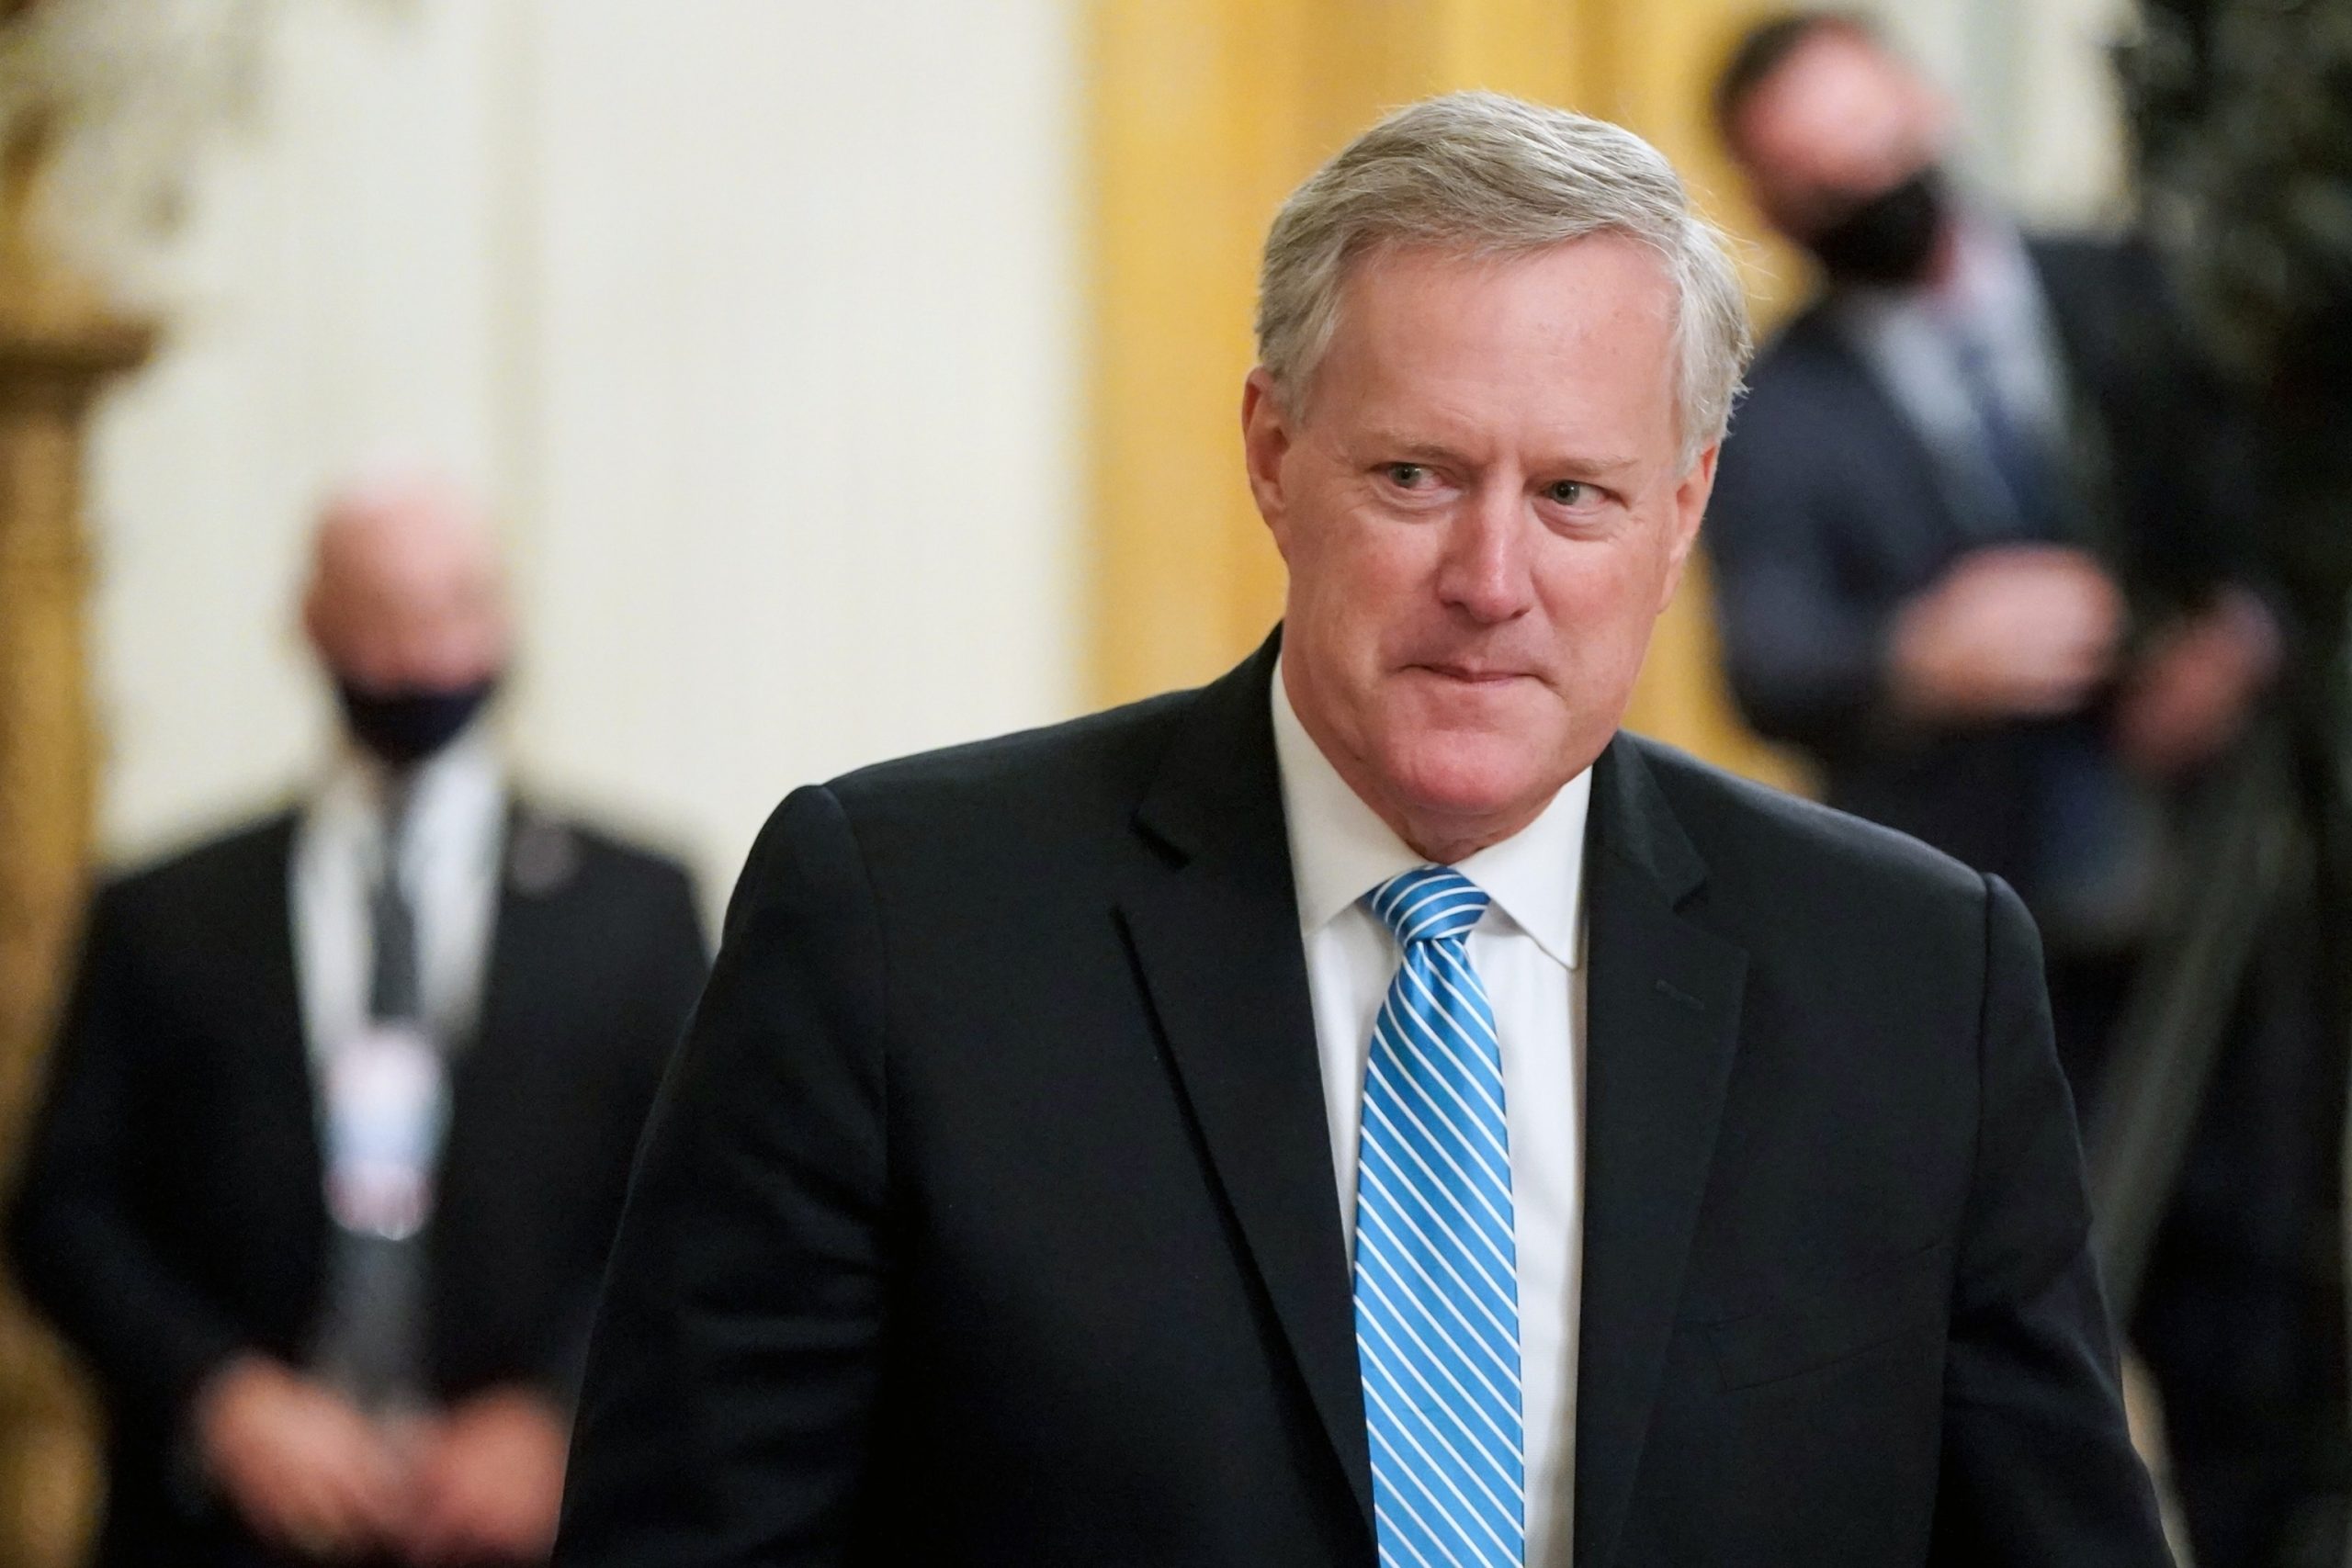 Appeals court denies Mark Meadows' request for rehearing in Georgia case removal